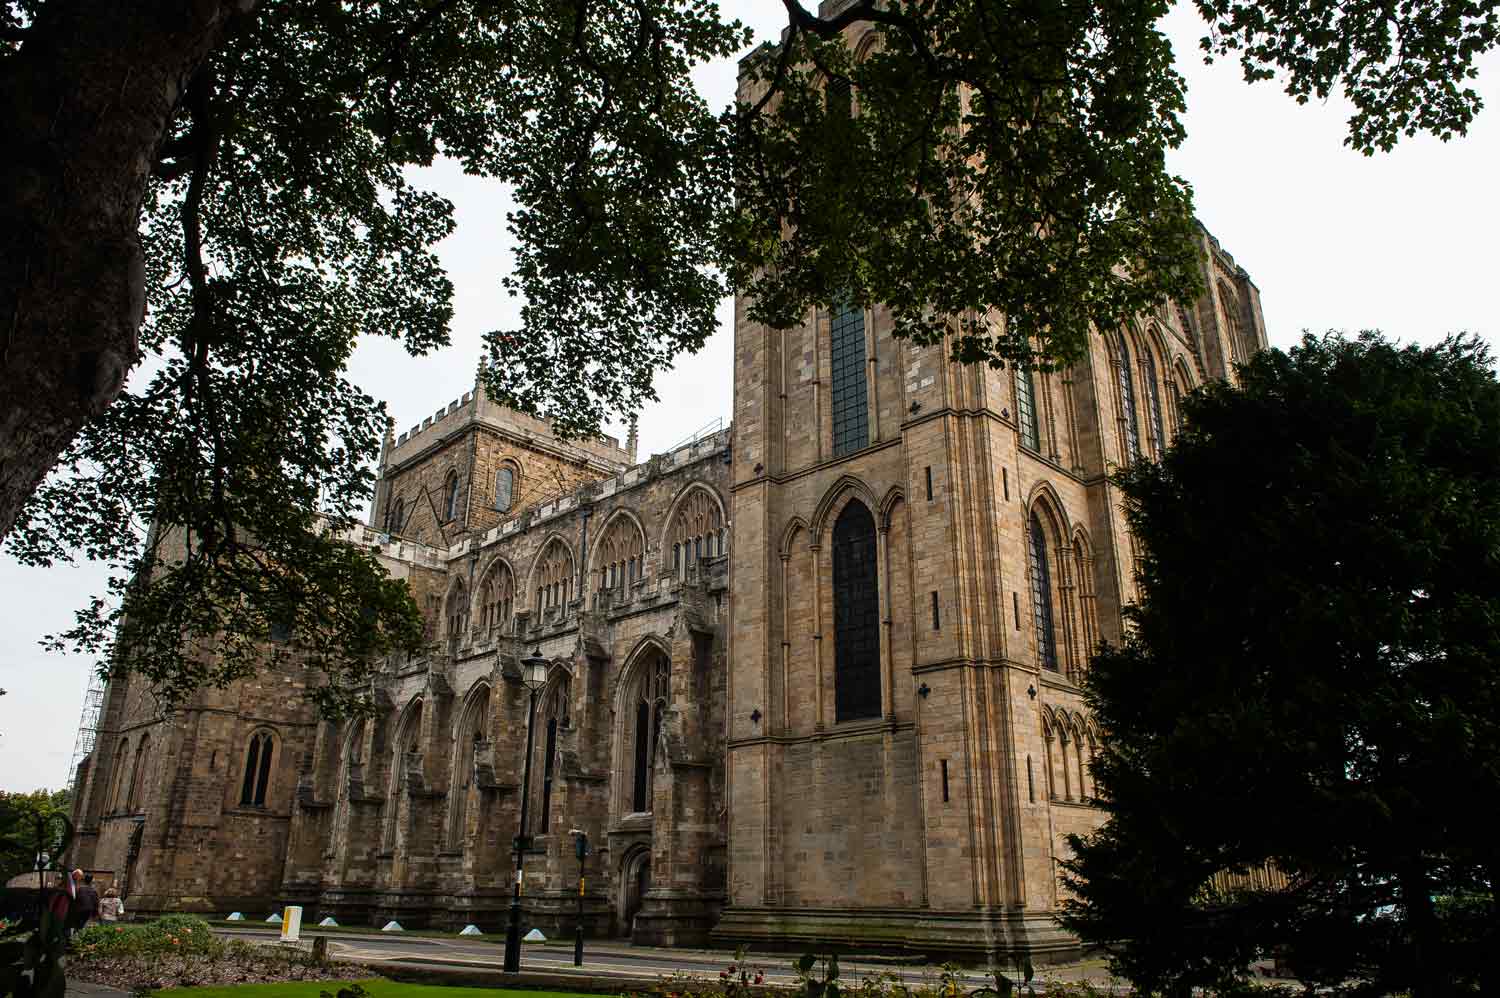 Local school children will come together for The Big Sing at Ripon Cathedral